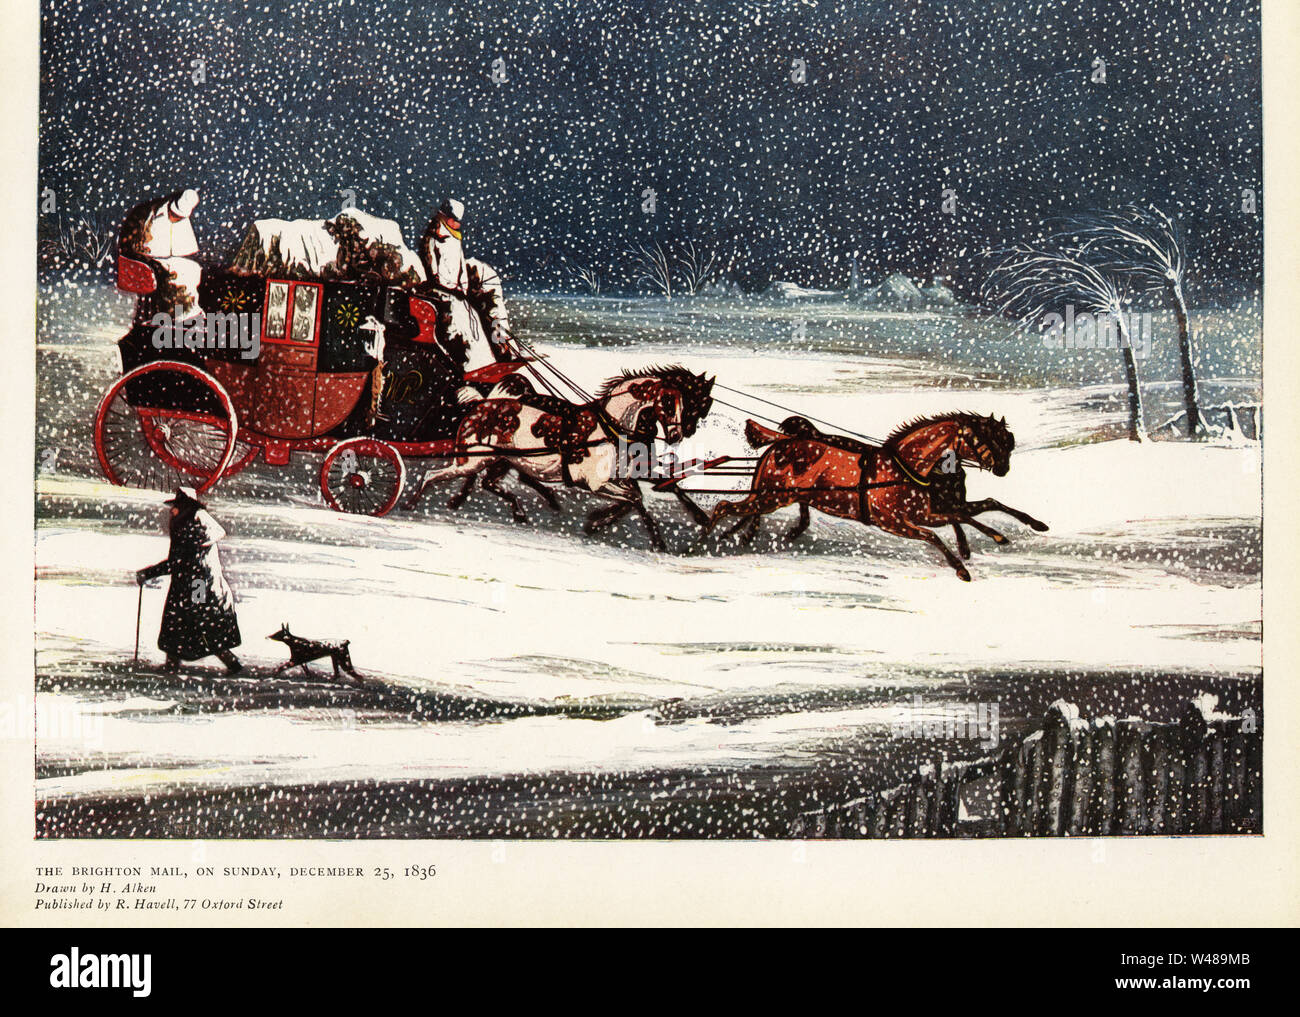 The Brighton mail coach driving in a snow storm on Sunday December 25, 1836. Color print after an illustration by Henry Alken in Ralph Nevill’s Old Sporting Prints, The Connoisseur Magazine, London, 1908. Stock Photo